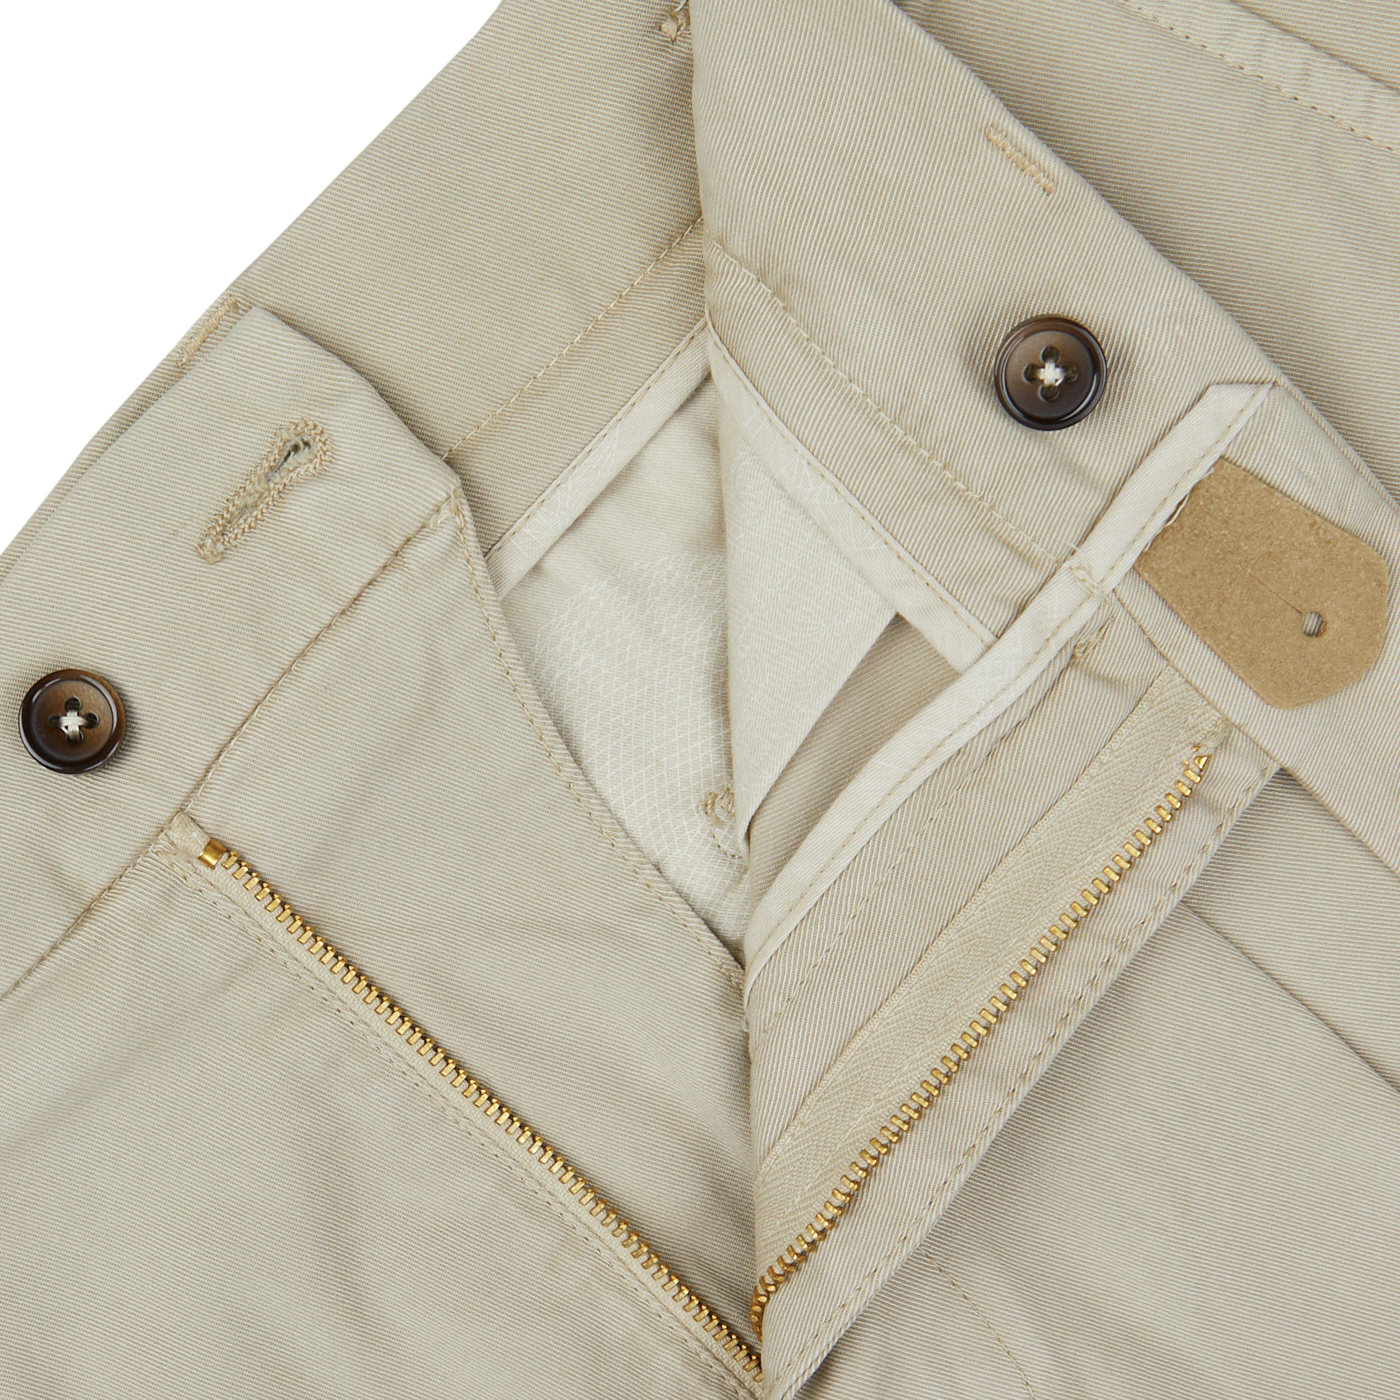 Close-up of a Sabbia Beige Cotton Blend Pleated Shorts with a zipper and buttons by Berwich.